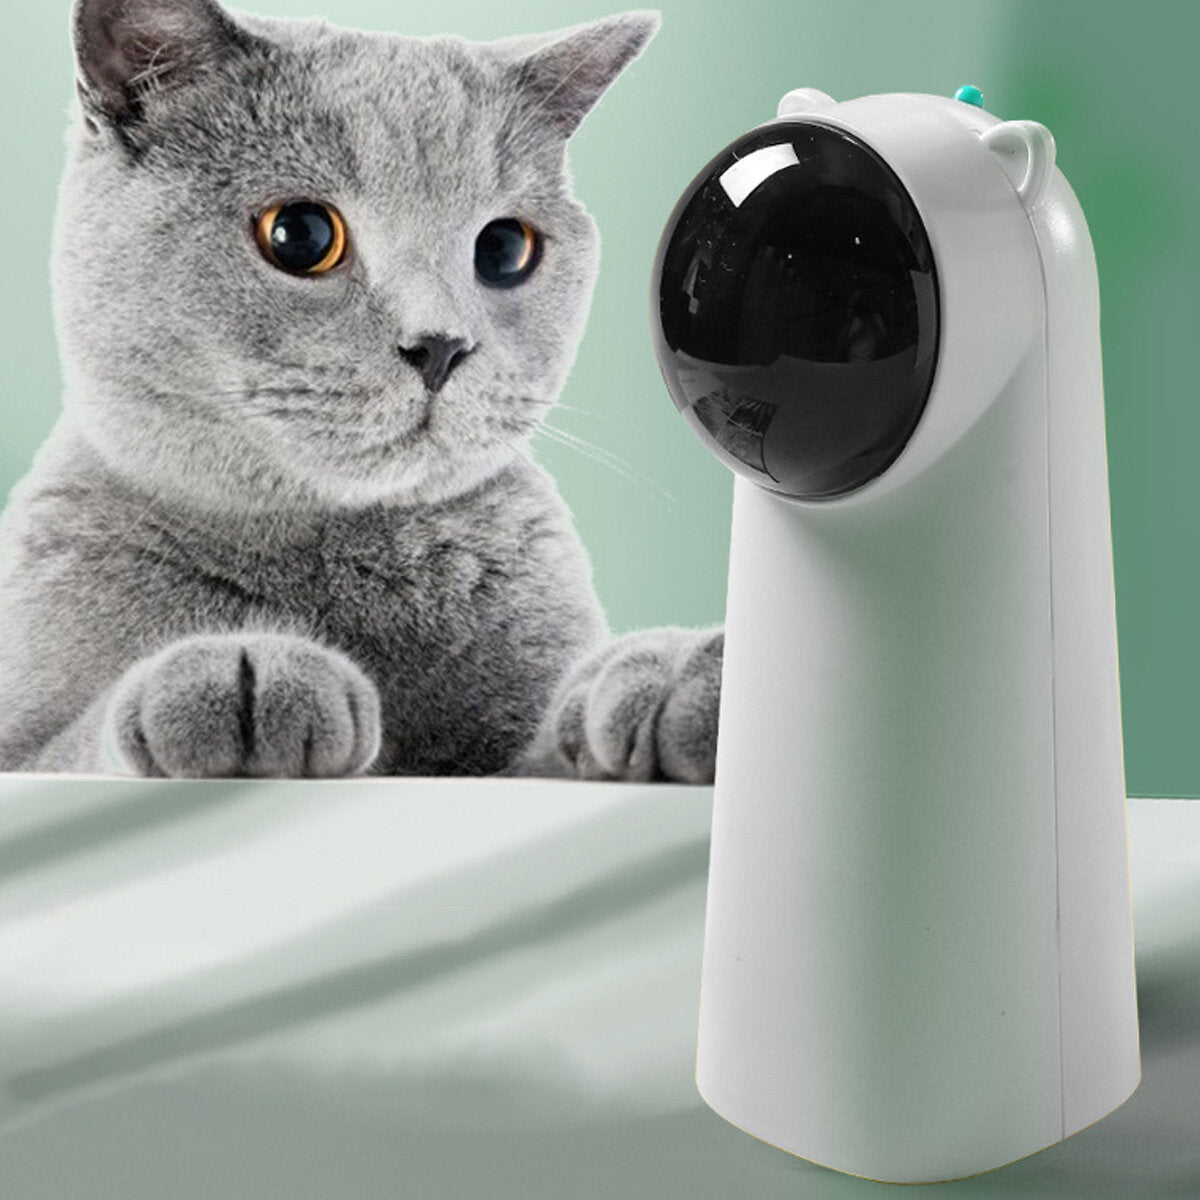 USB Automatic Cat Toys Teaser Interactive Smart Teasing Pet 5 Angles 2-Gears LED Laser Funny Handheld Mode Electronic Pet